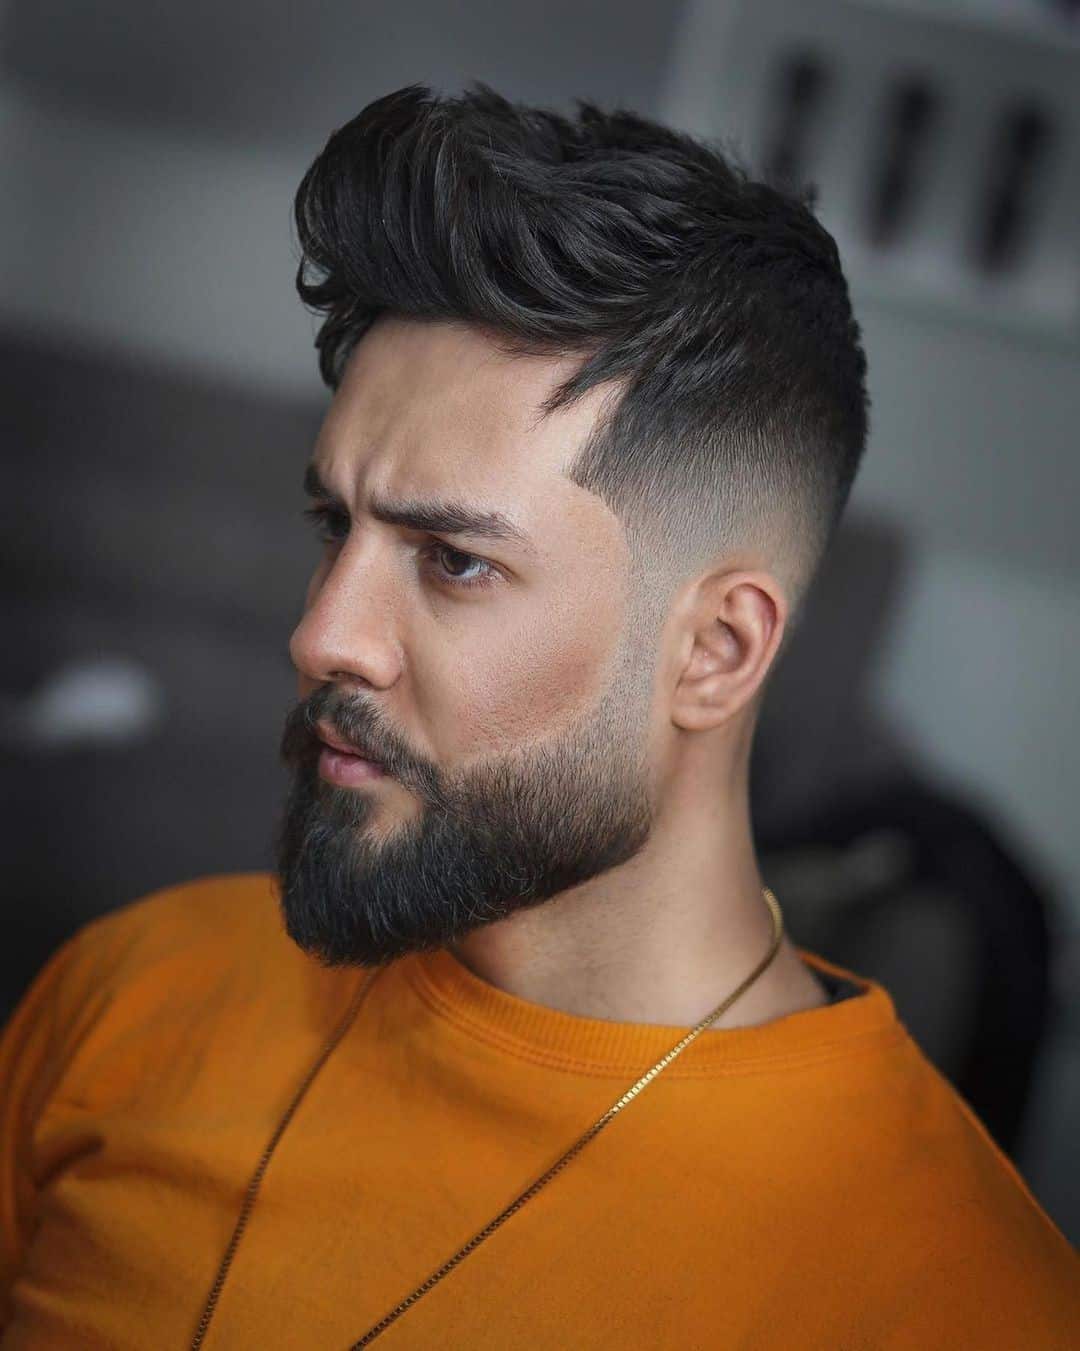 cool beard styles for round faces